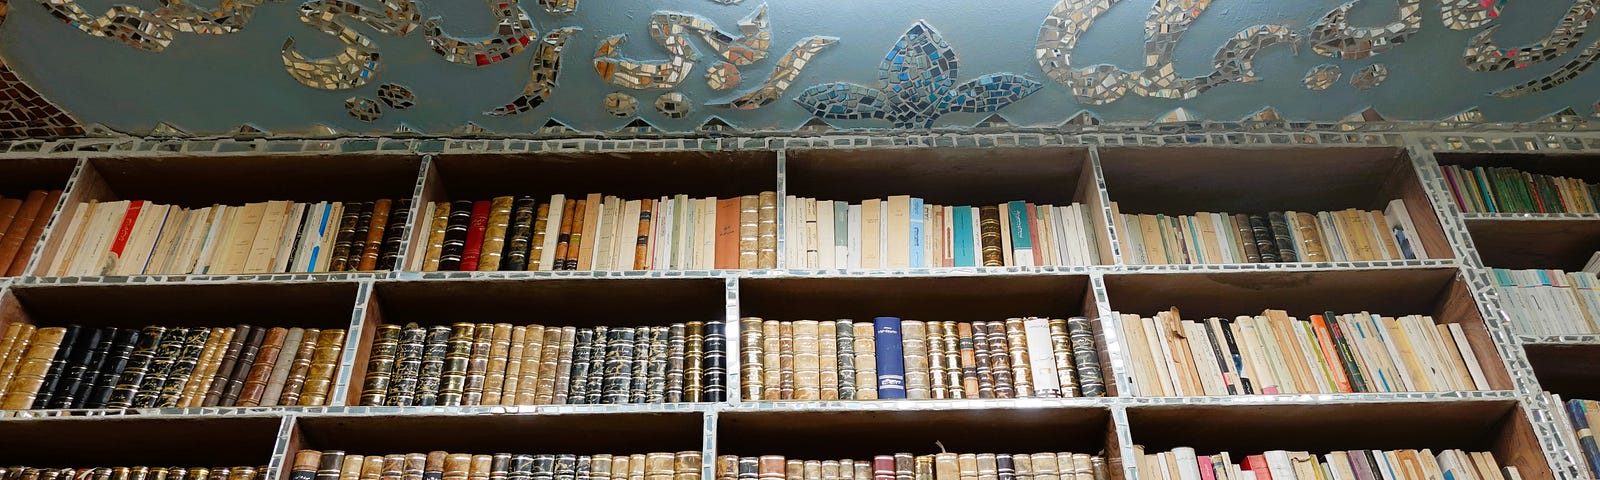 A curated bookshelf with classically bound tomes against a light blue ceiling decorated with mirror mosaics